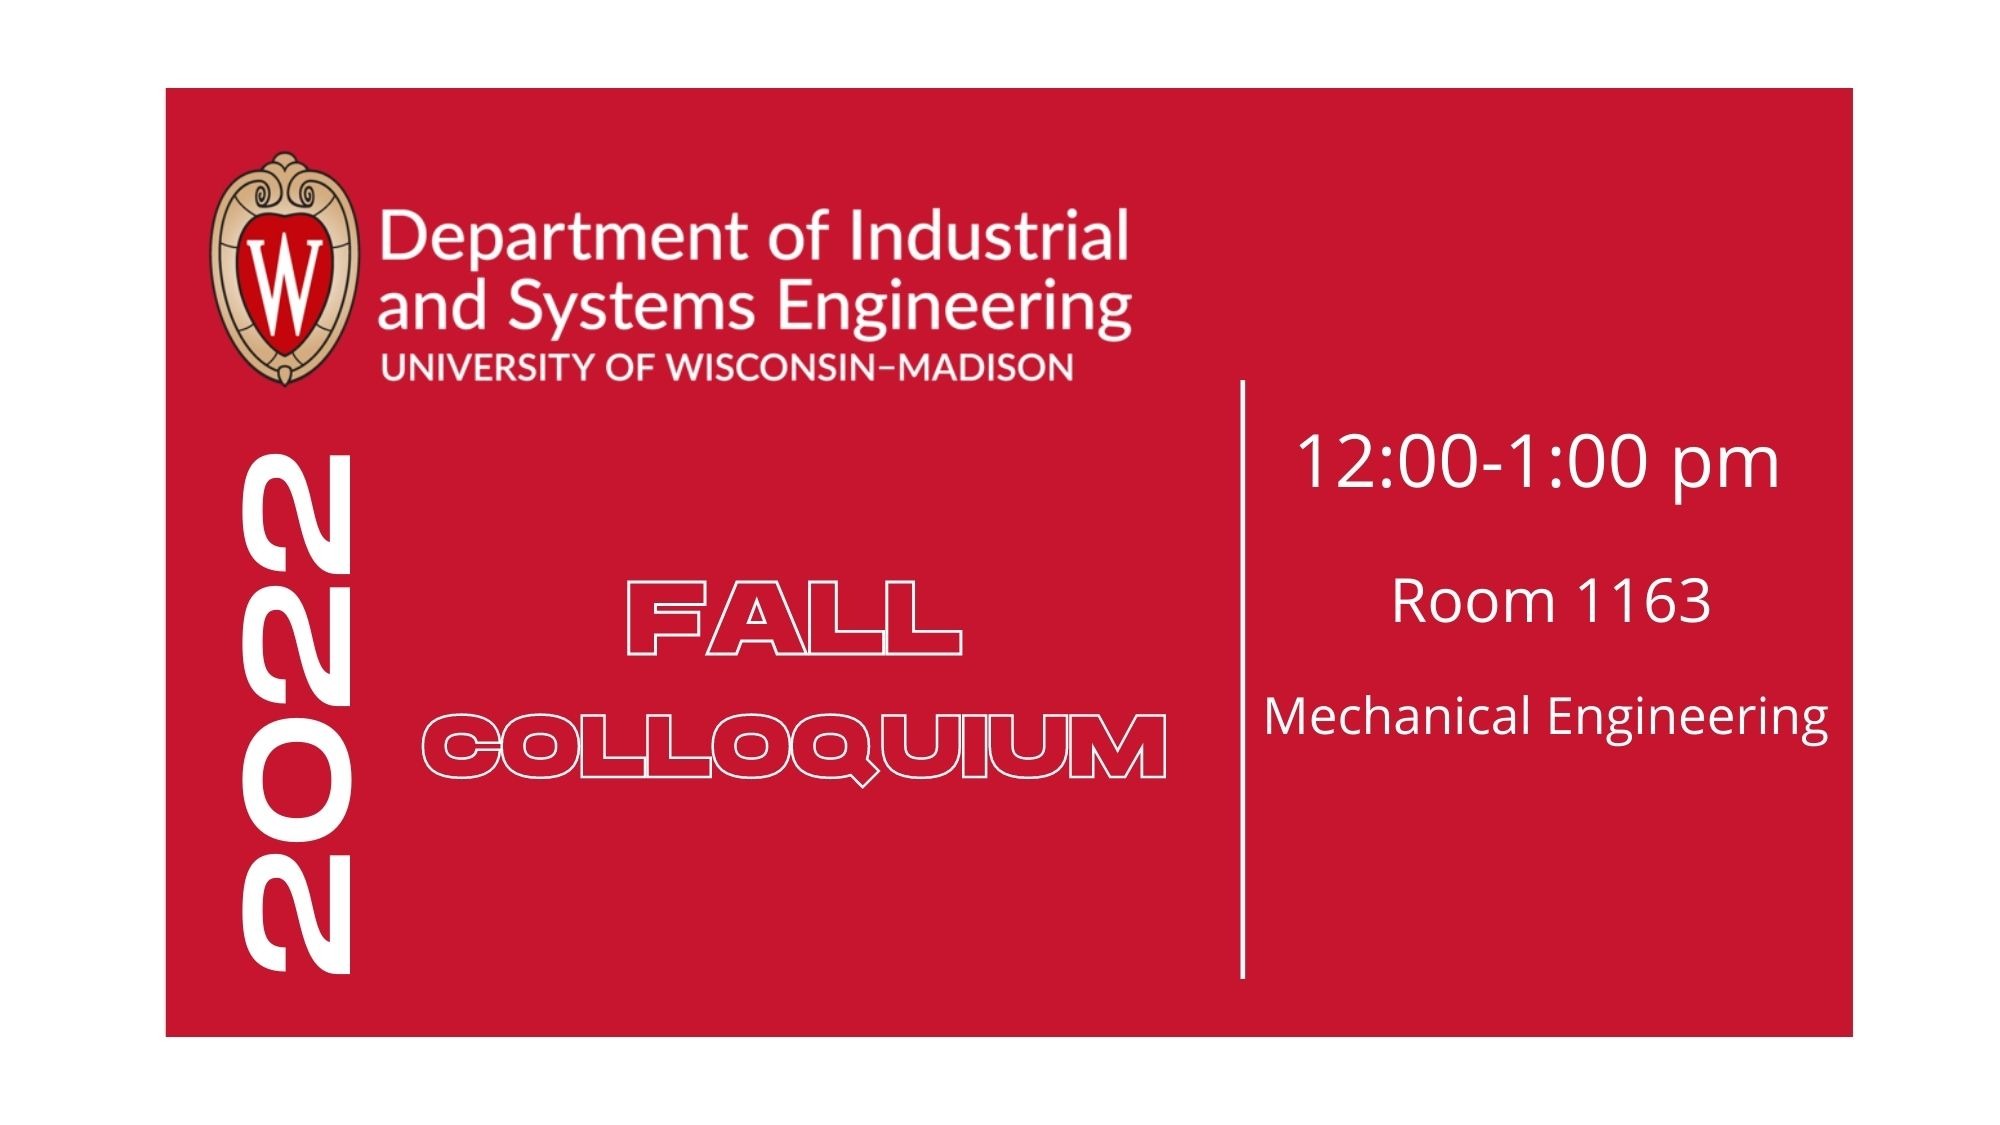 Fall Colloquium from 12:00PM-1:00PM Room 1163